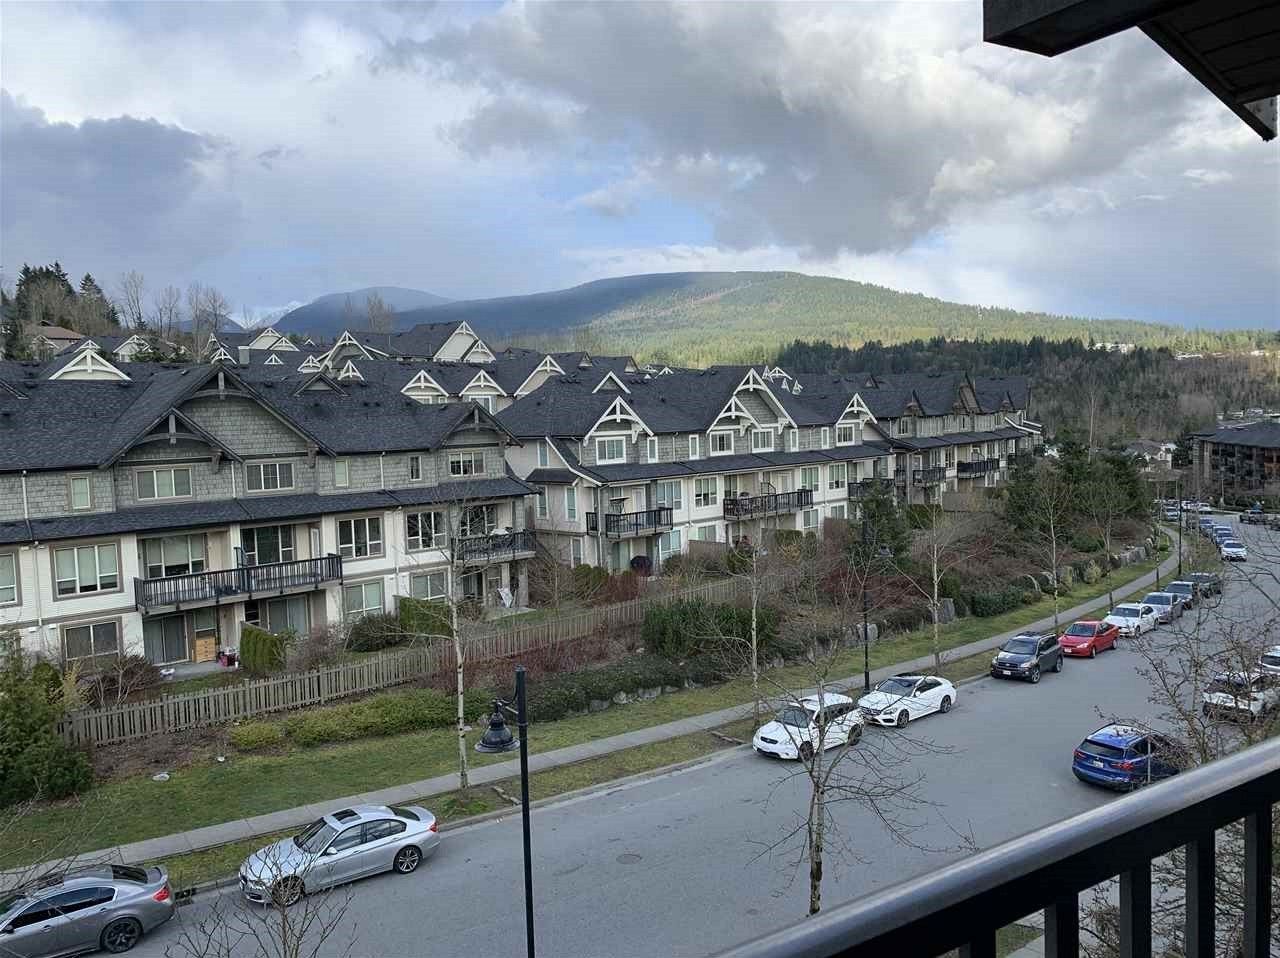 Main Photo: 502 3110 DAYANEE SPRINGS BOULEVARD in Coquitlam: Westwood Plateau Condo for sale : MLS®# R2550114